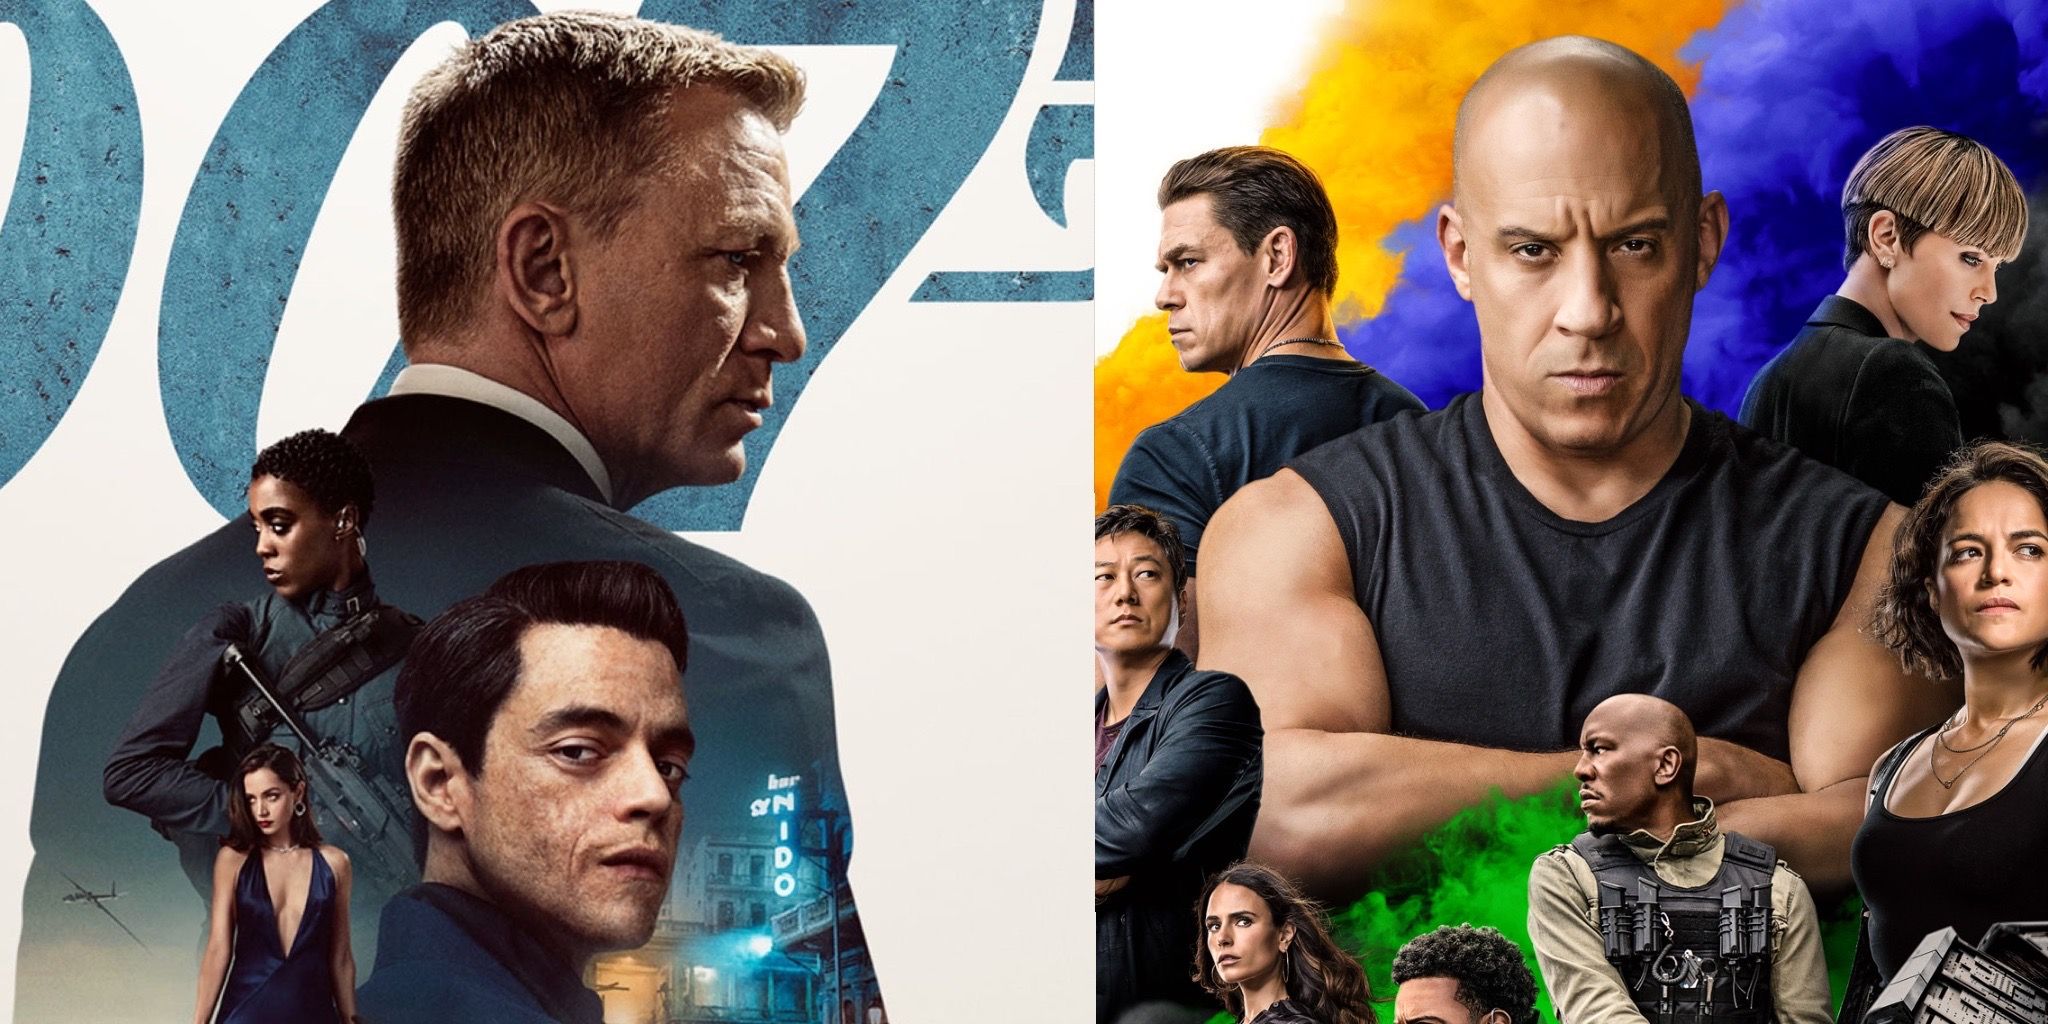 Posters for No Time To Die and Fast & Furious 9